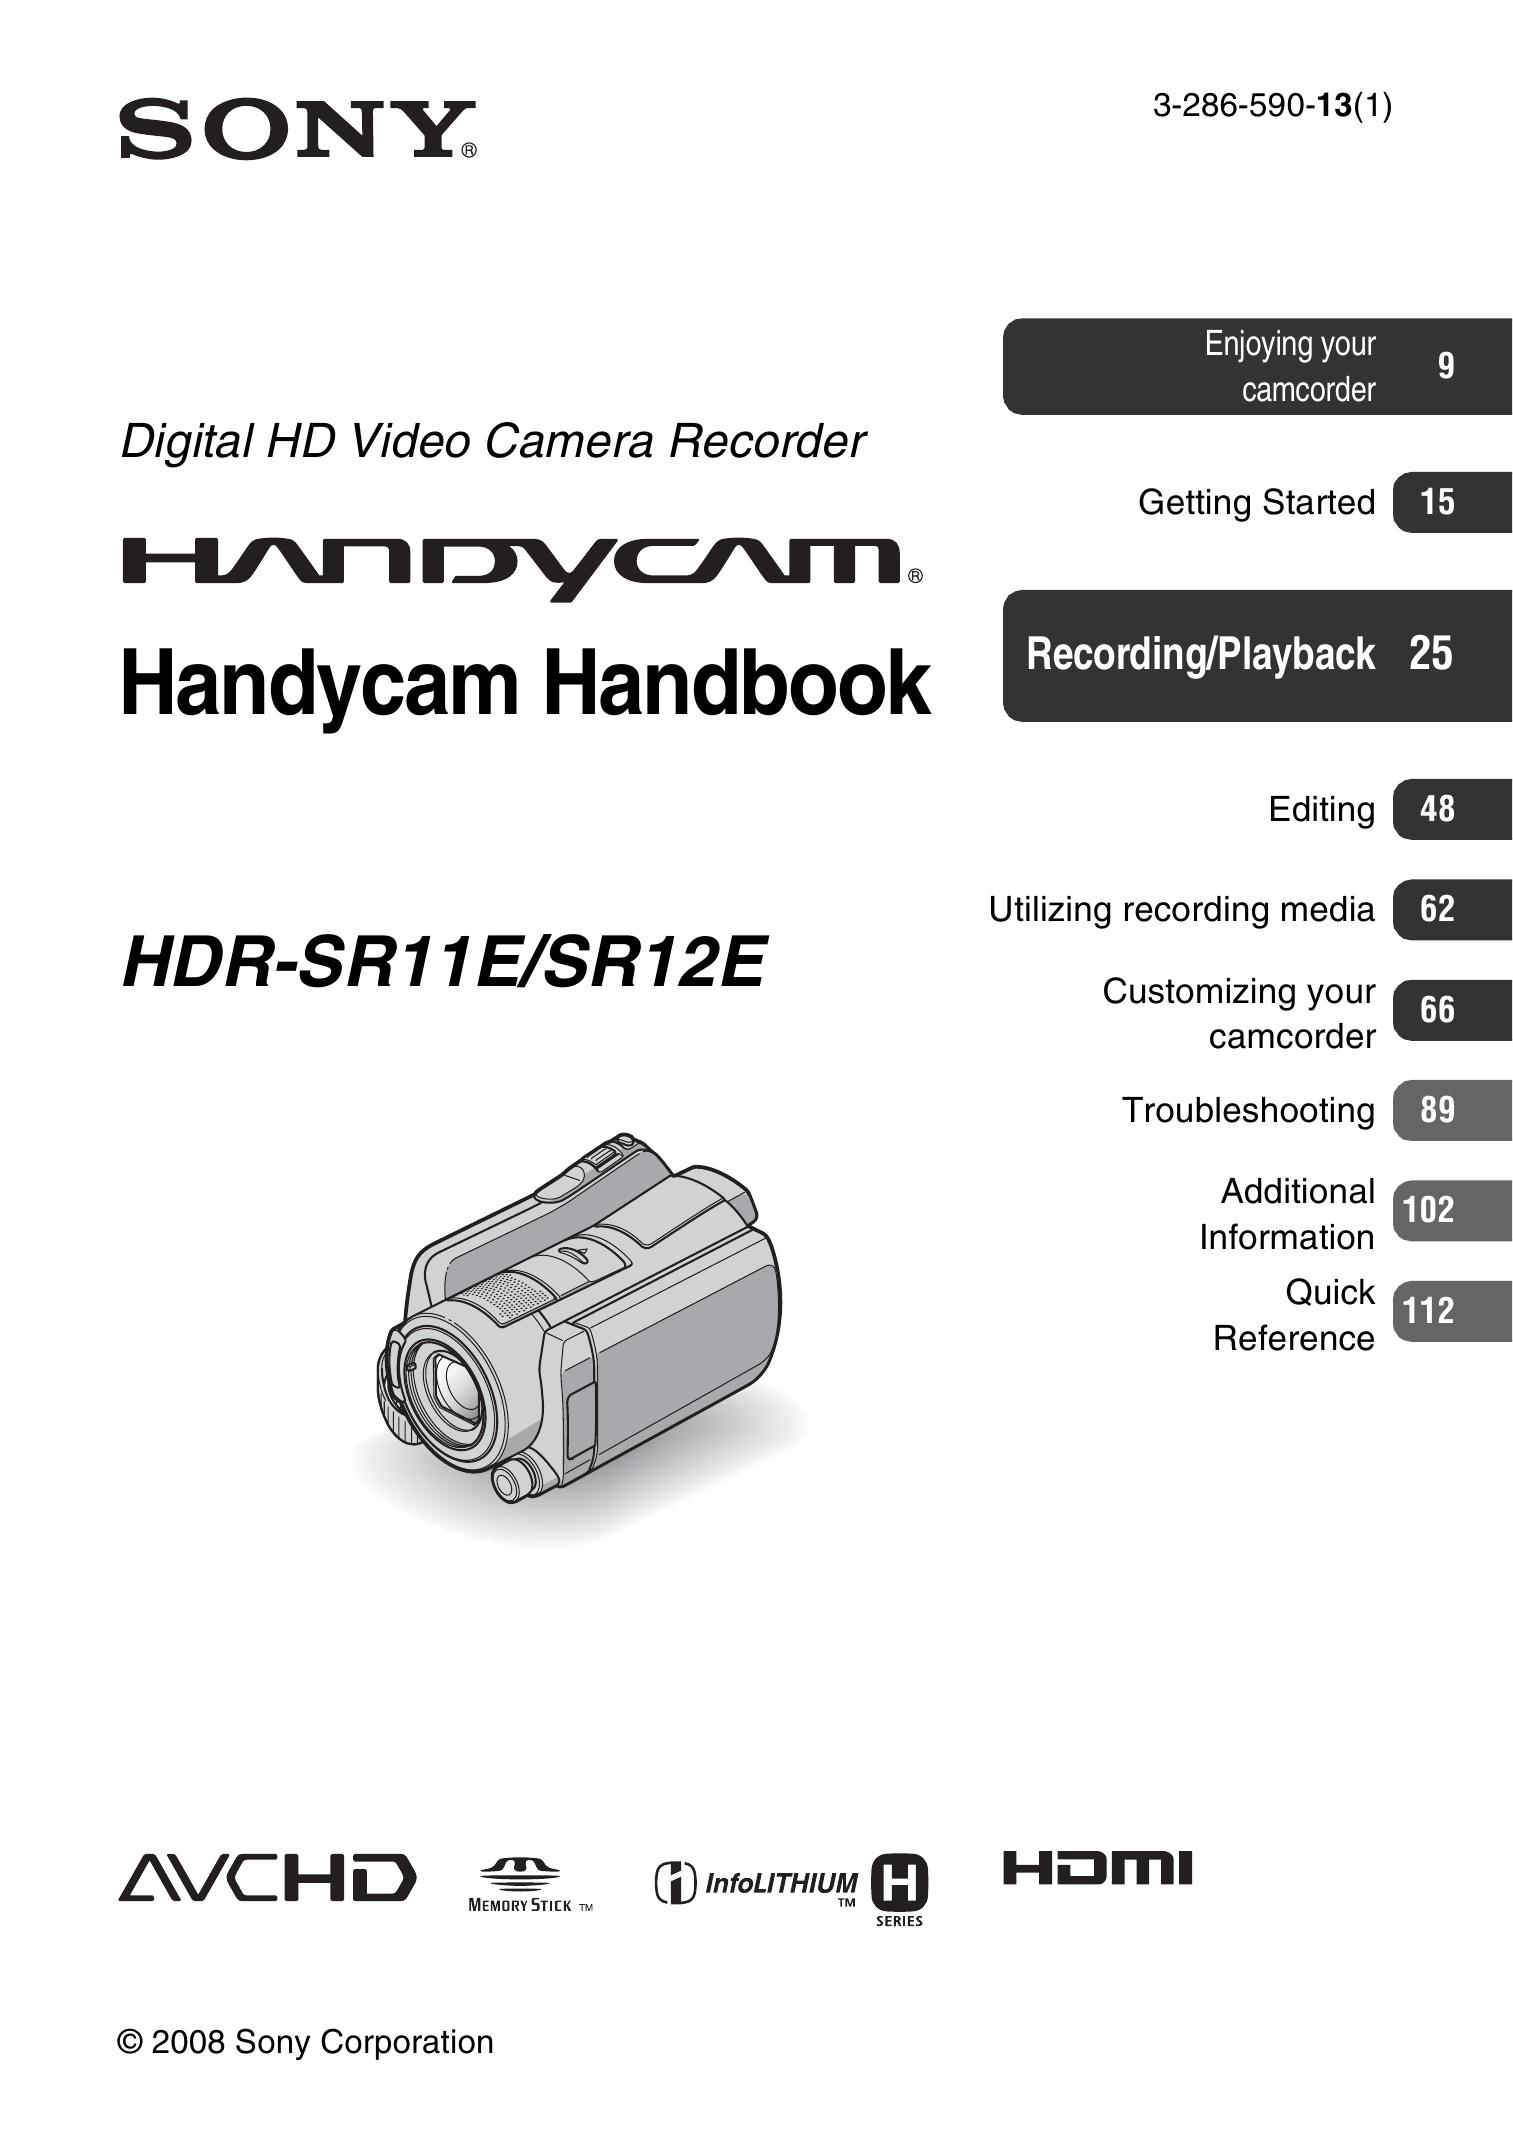 Sony 3-286-590-13(1) Camcorder User Manual